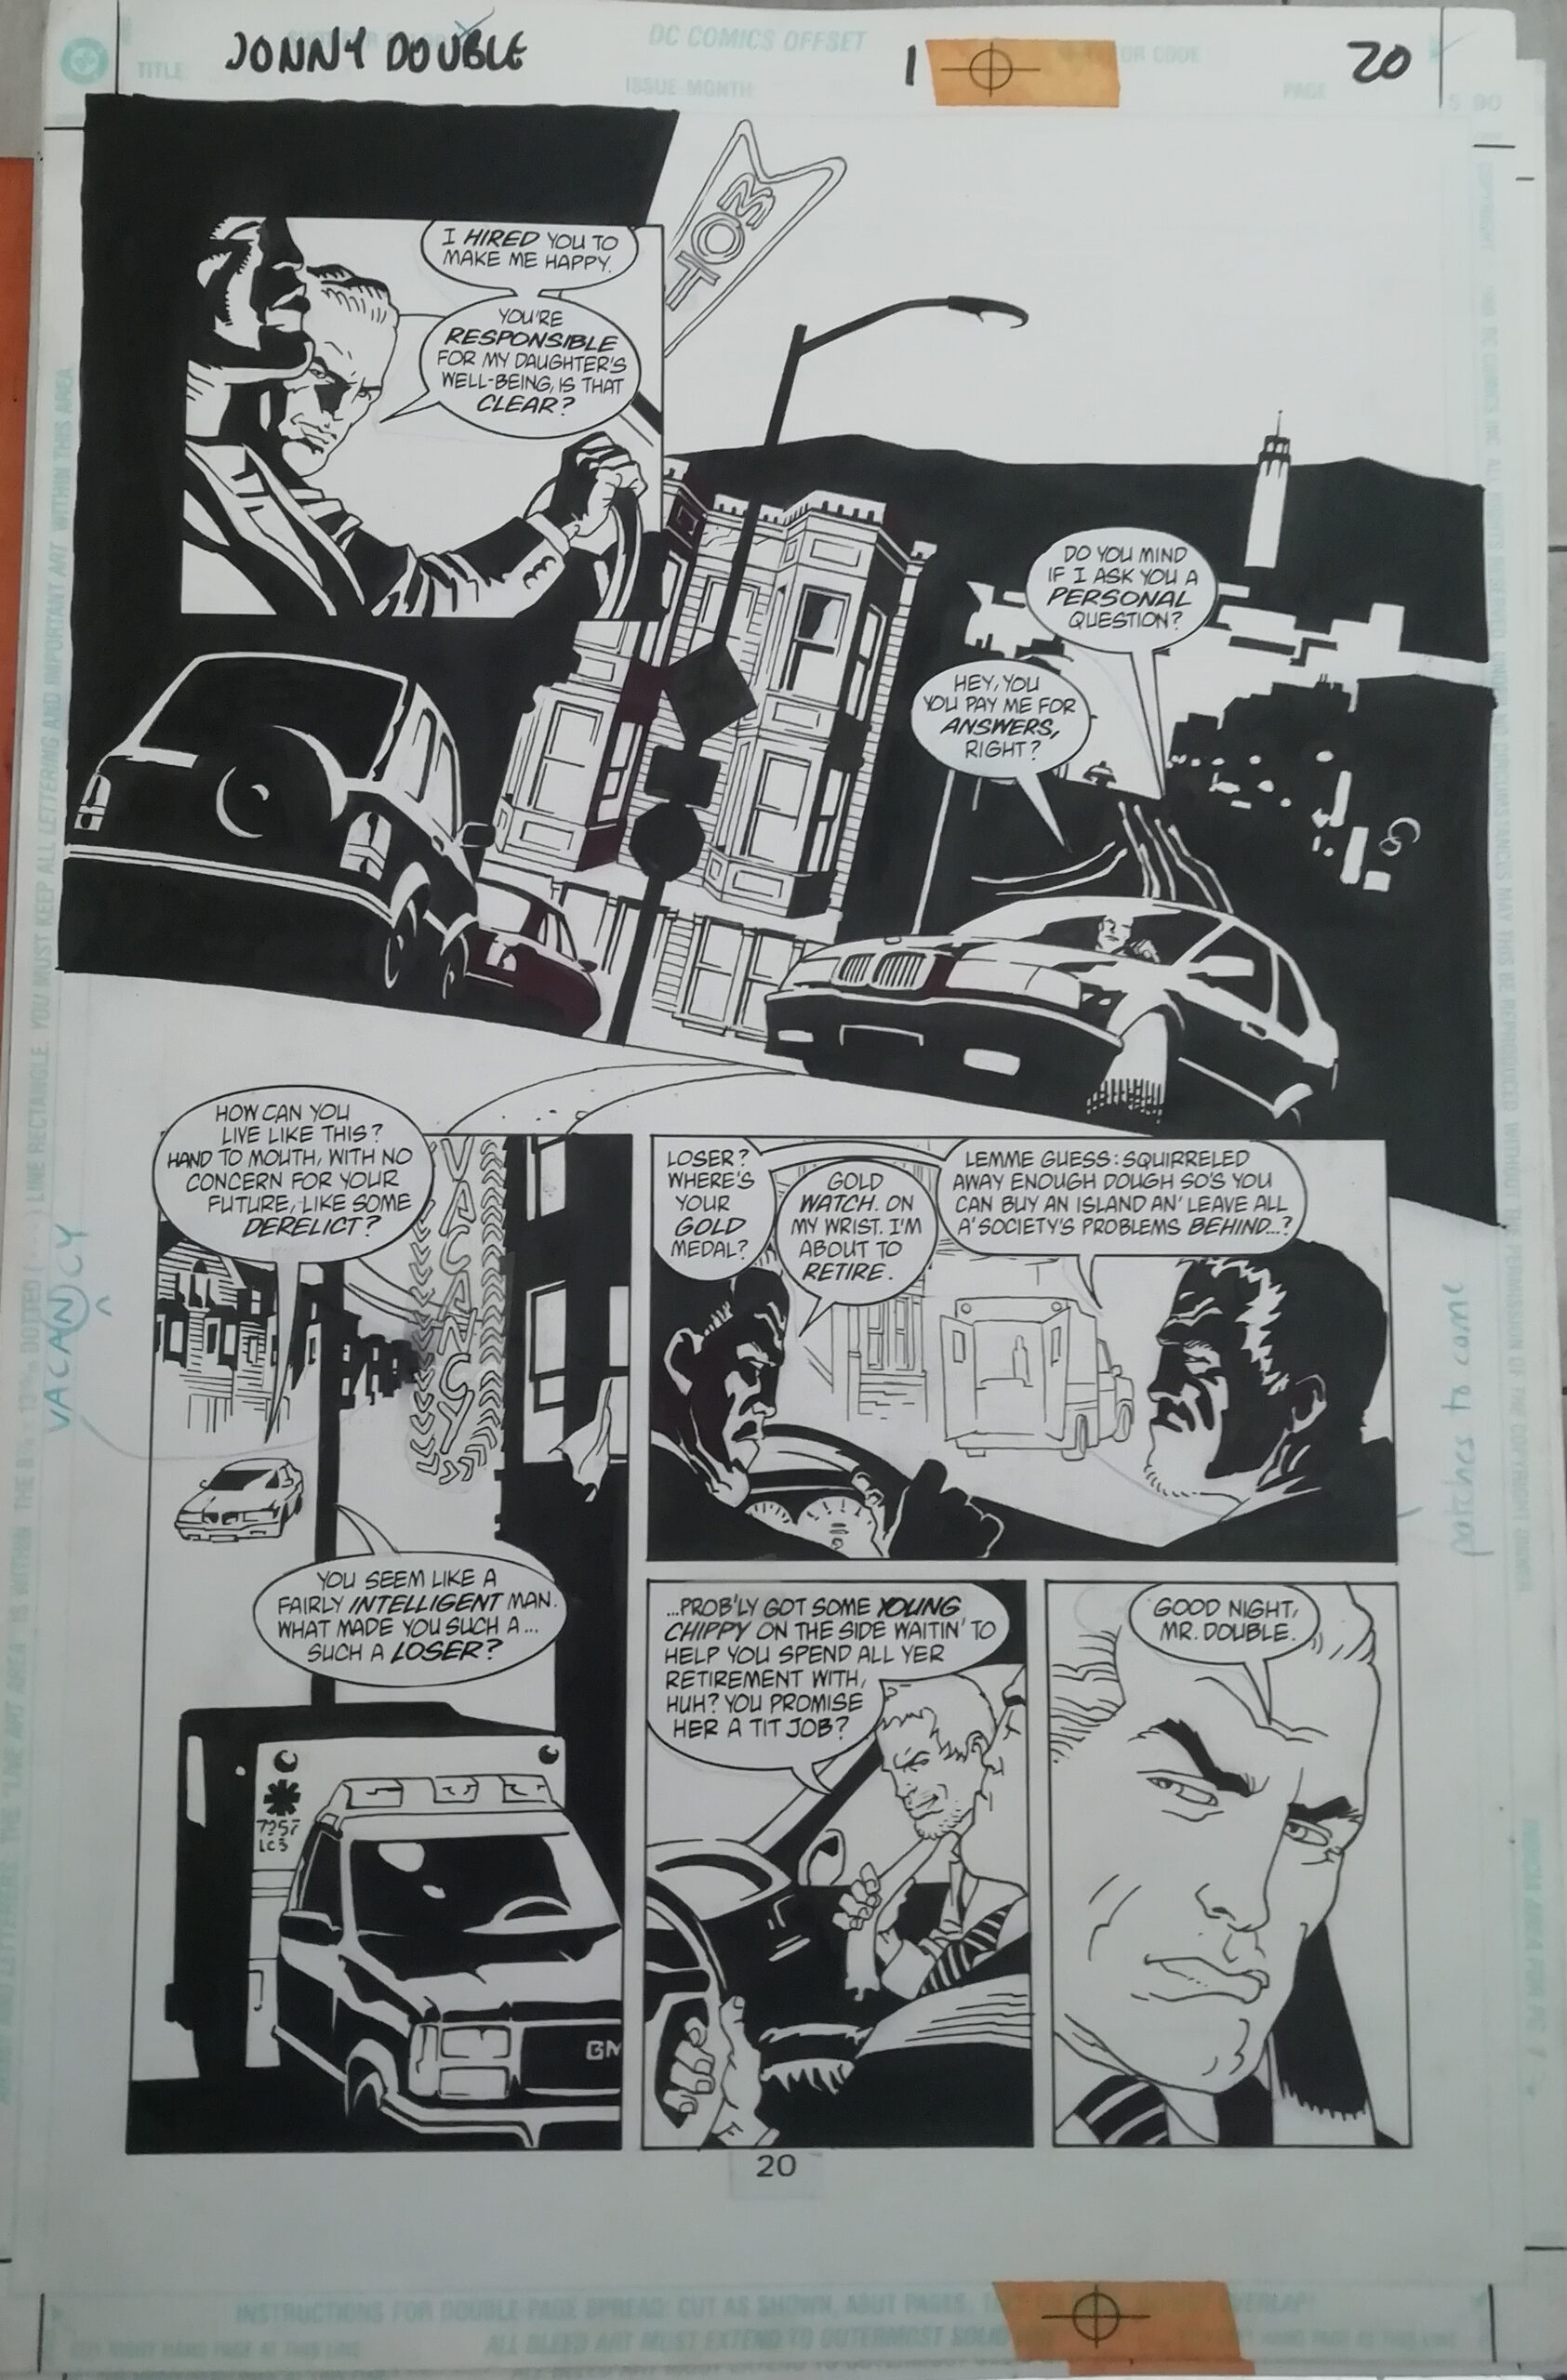 Jonny Double issue 1, page 20